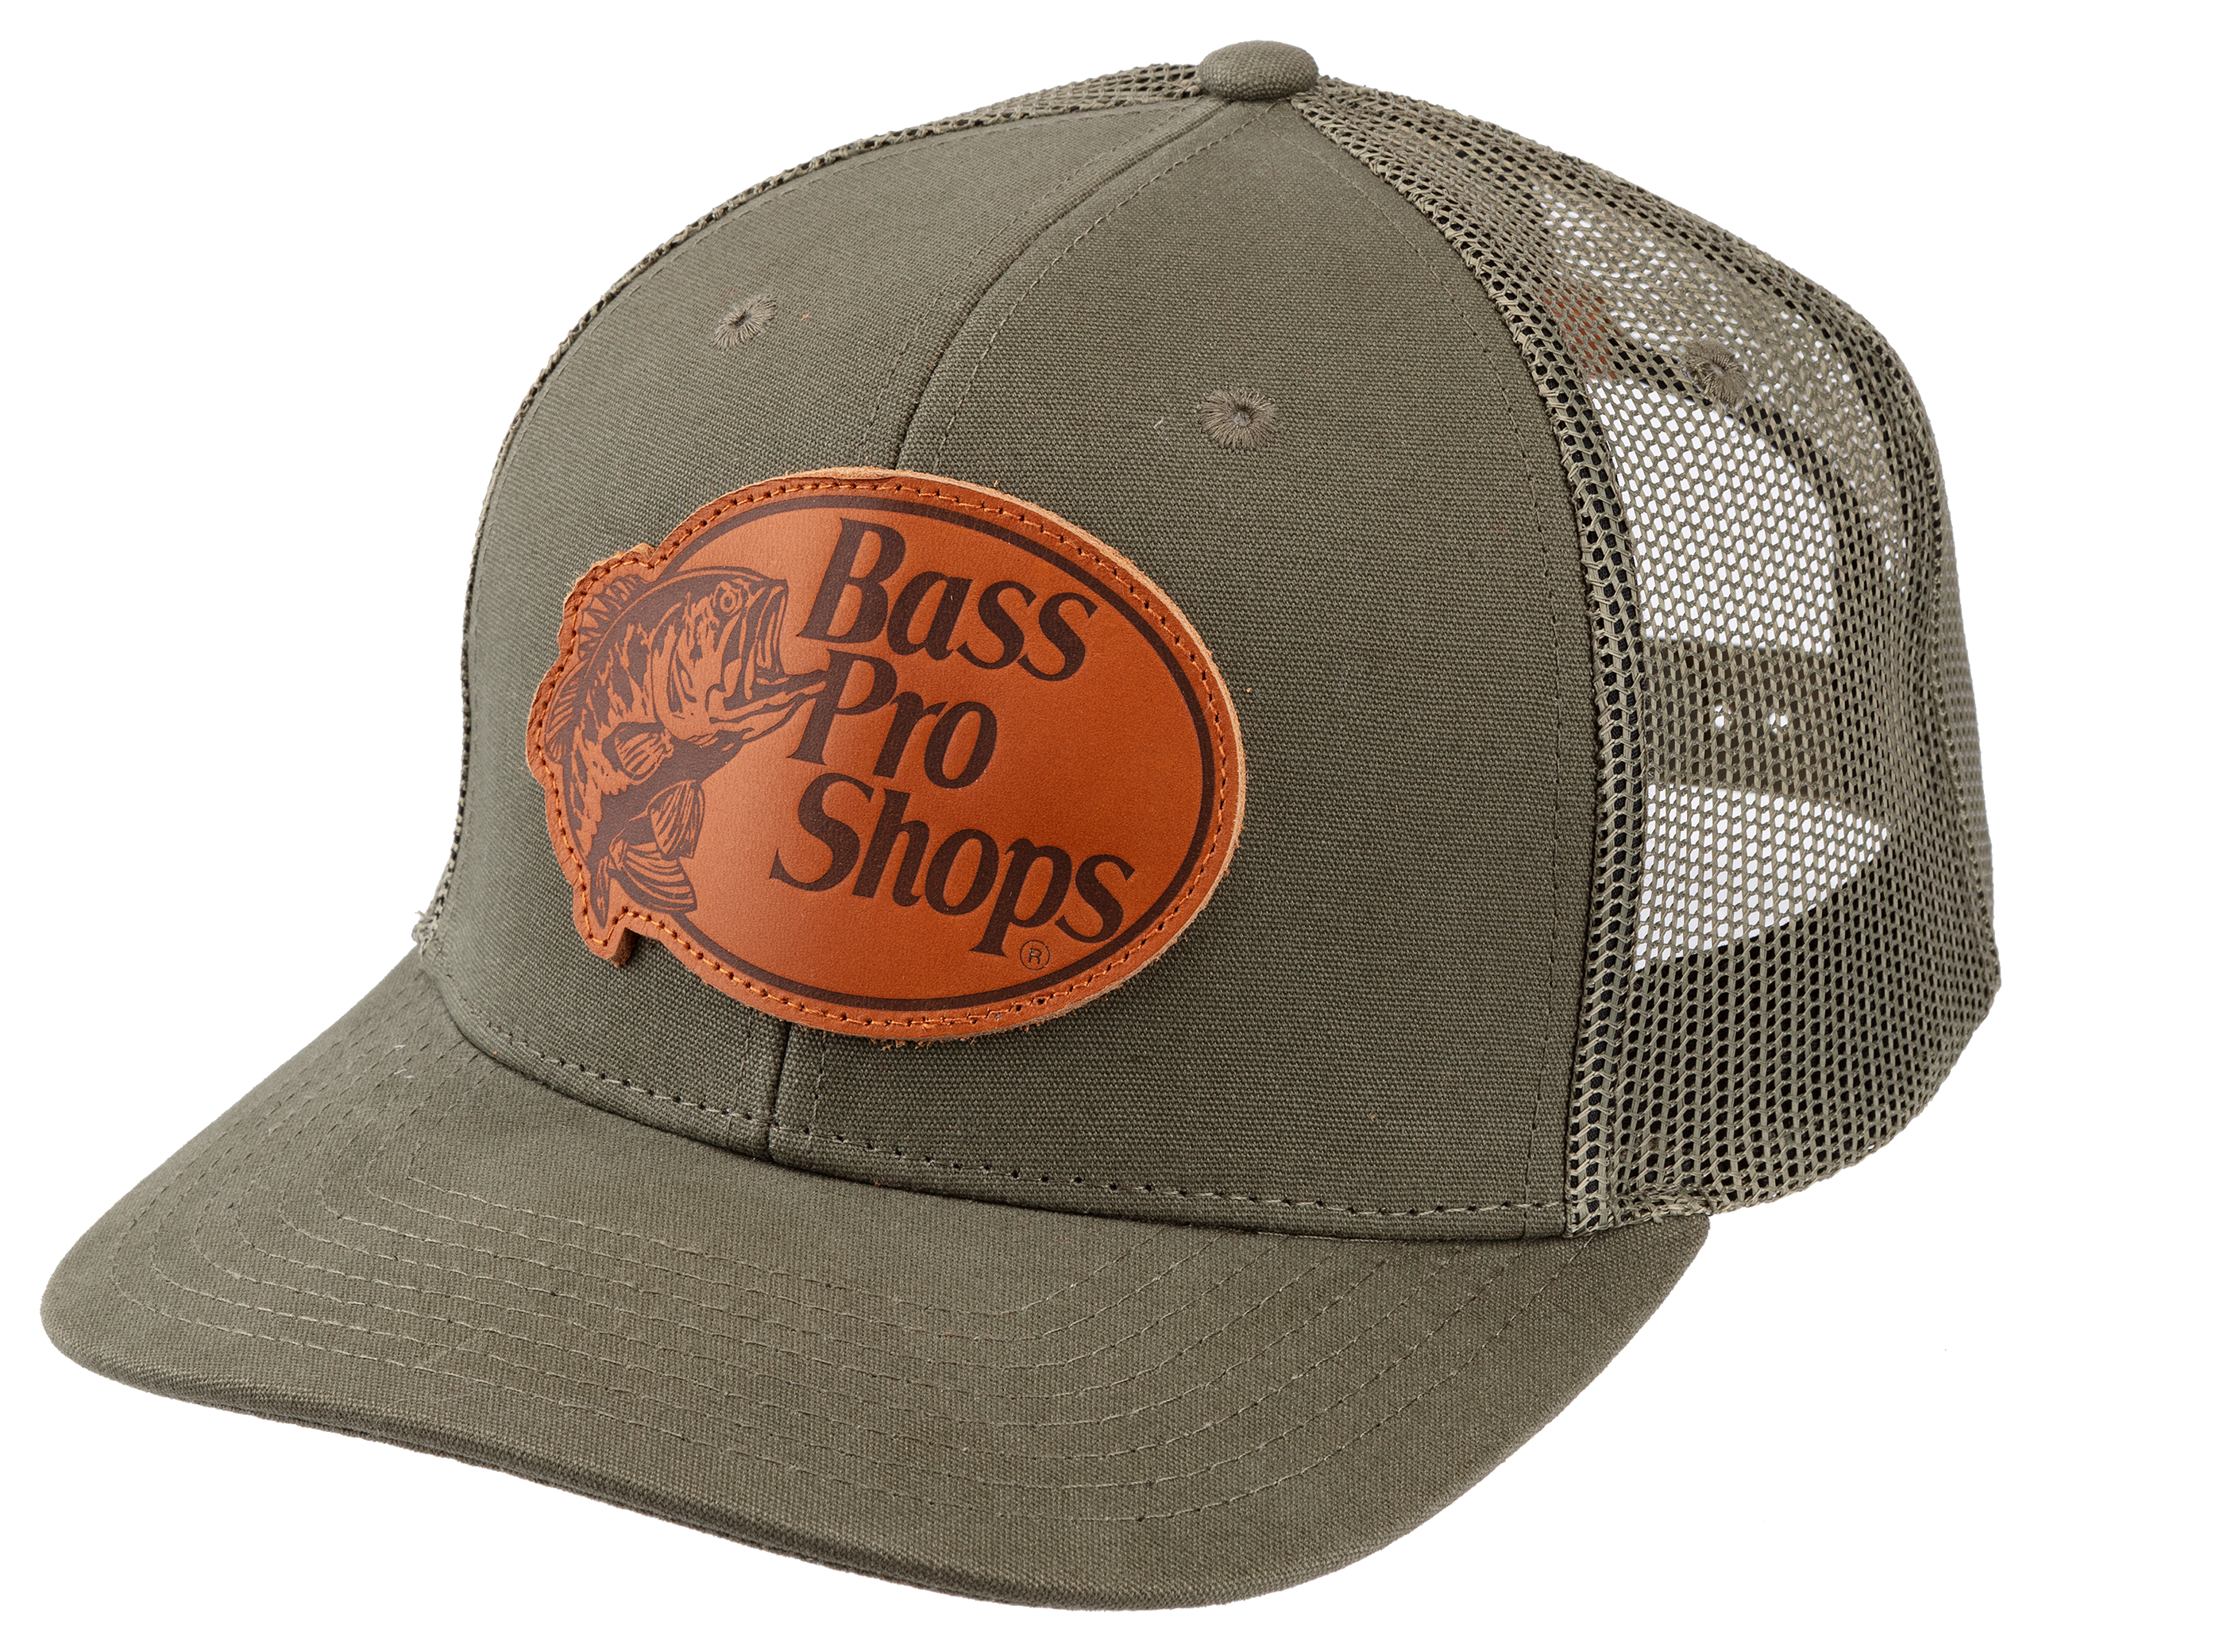 His Last Steps Leather Turkey Patch Hats